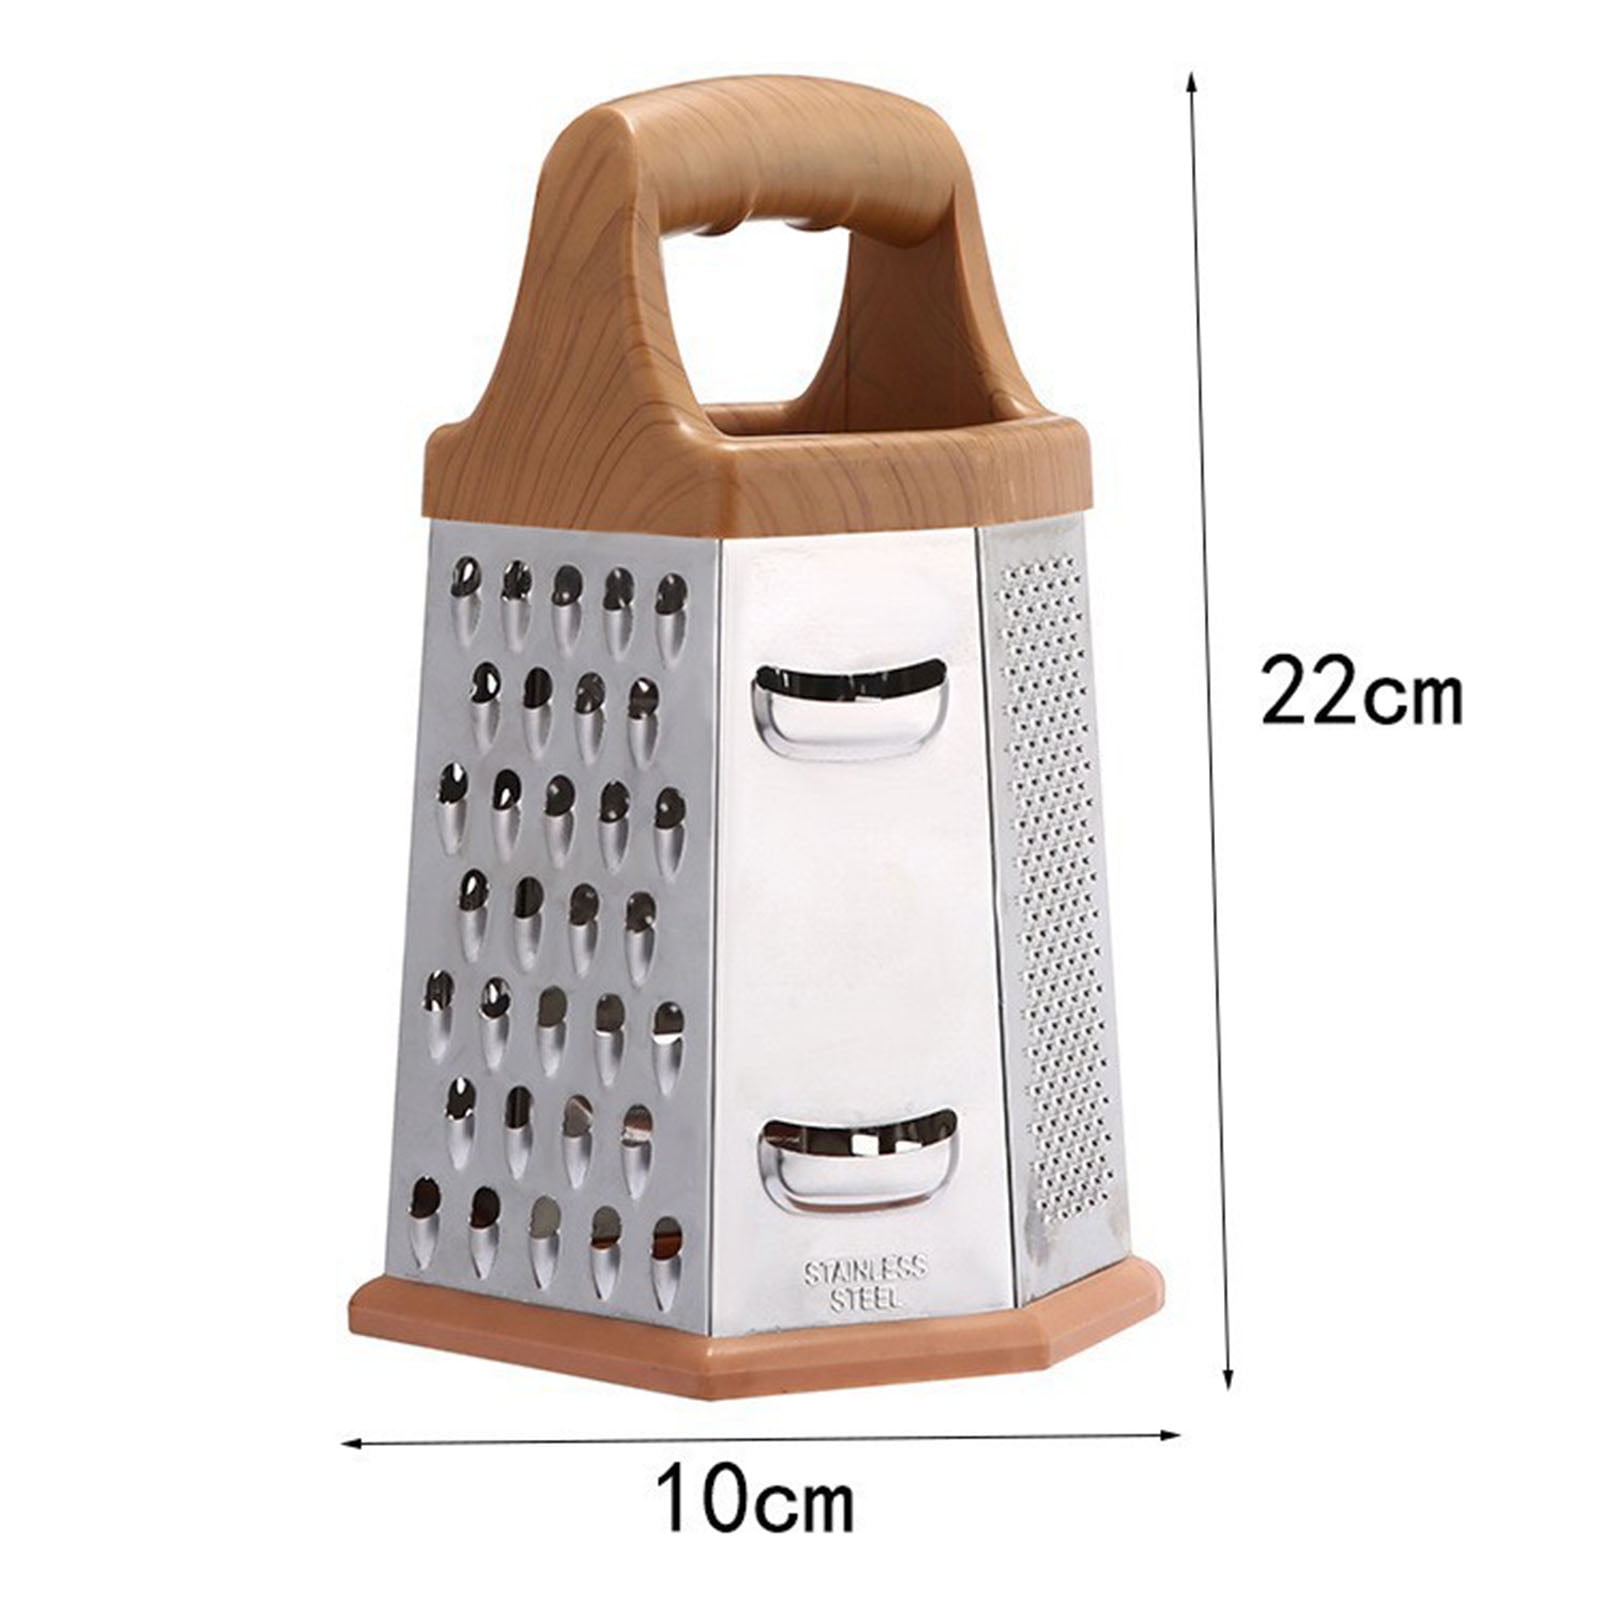 Limei Onion Grater Save Time Mirror Polish Useful Tower-shaped